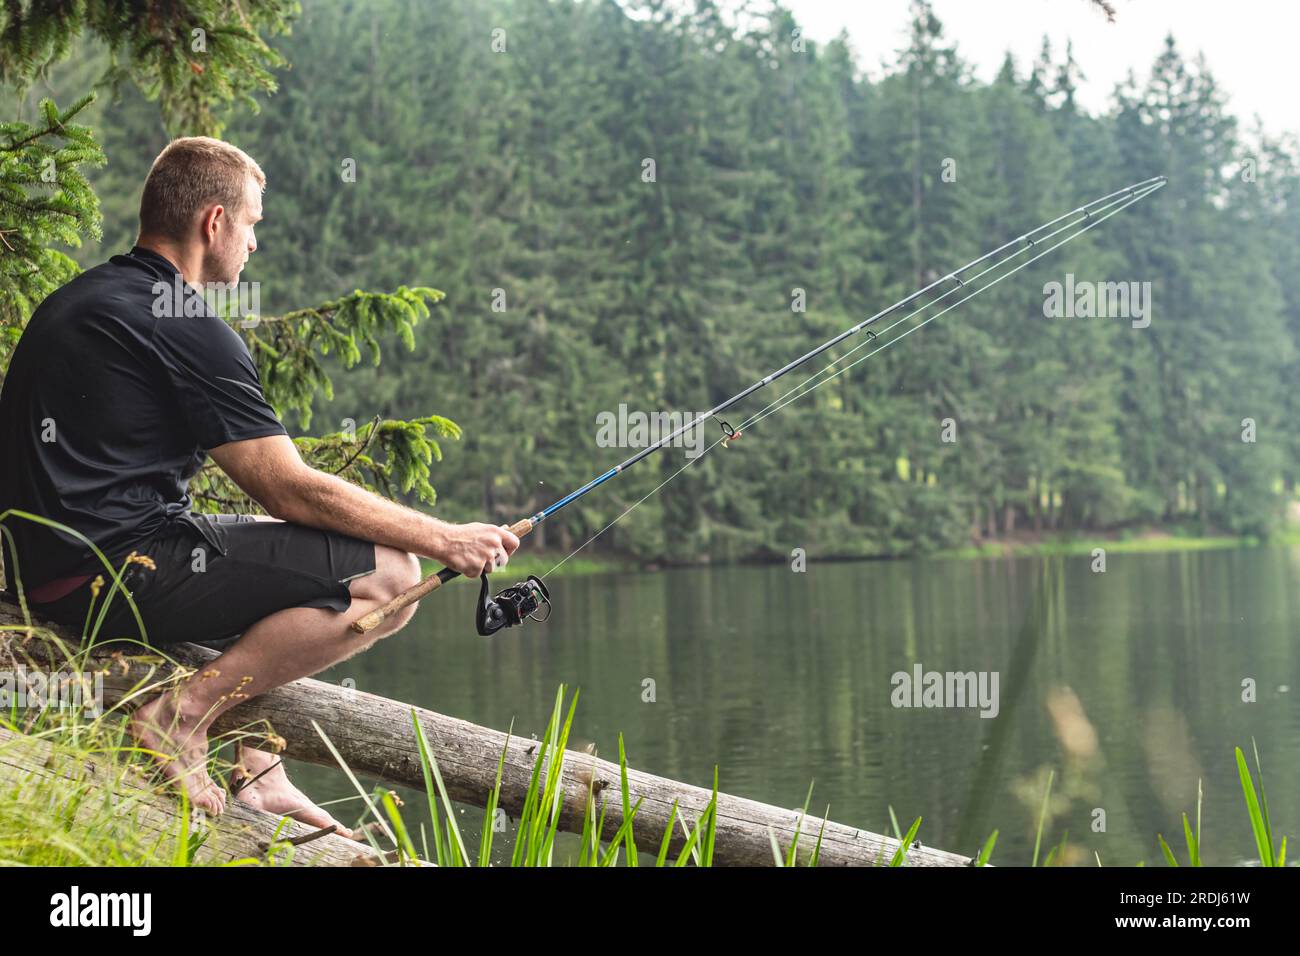 https://c8.alamy.com/comp/2RDJ61W/fishing-day-fun-leisure-activity-fishing-rod-and-equipment-outdoors-backgrounds-copy-space-design-composition-2RDJ61W.jpg